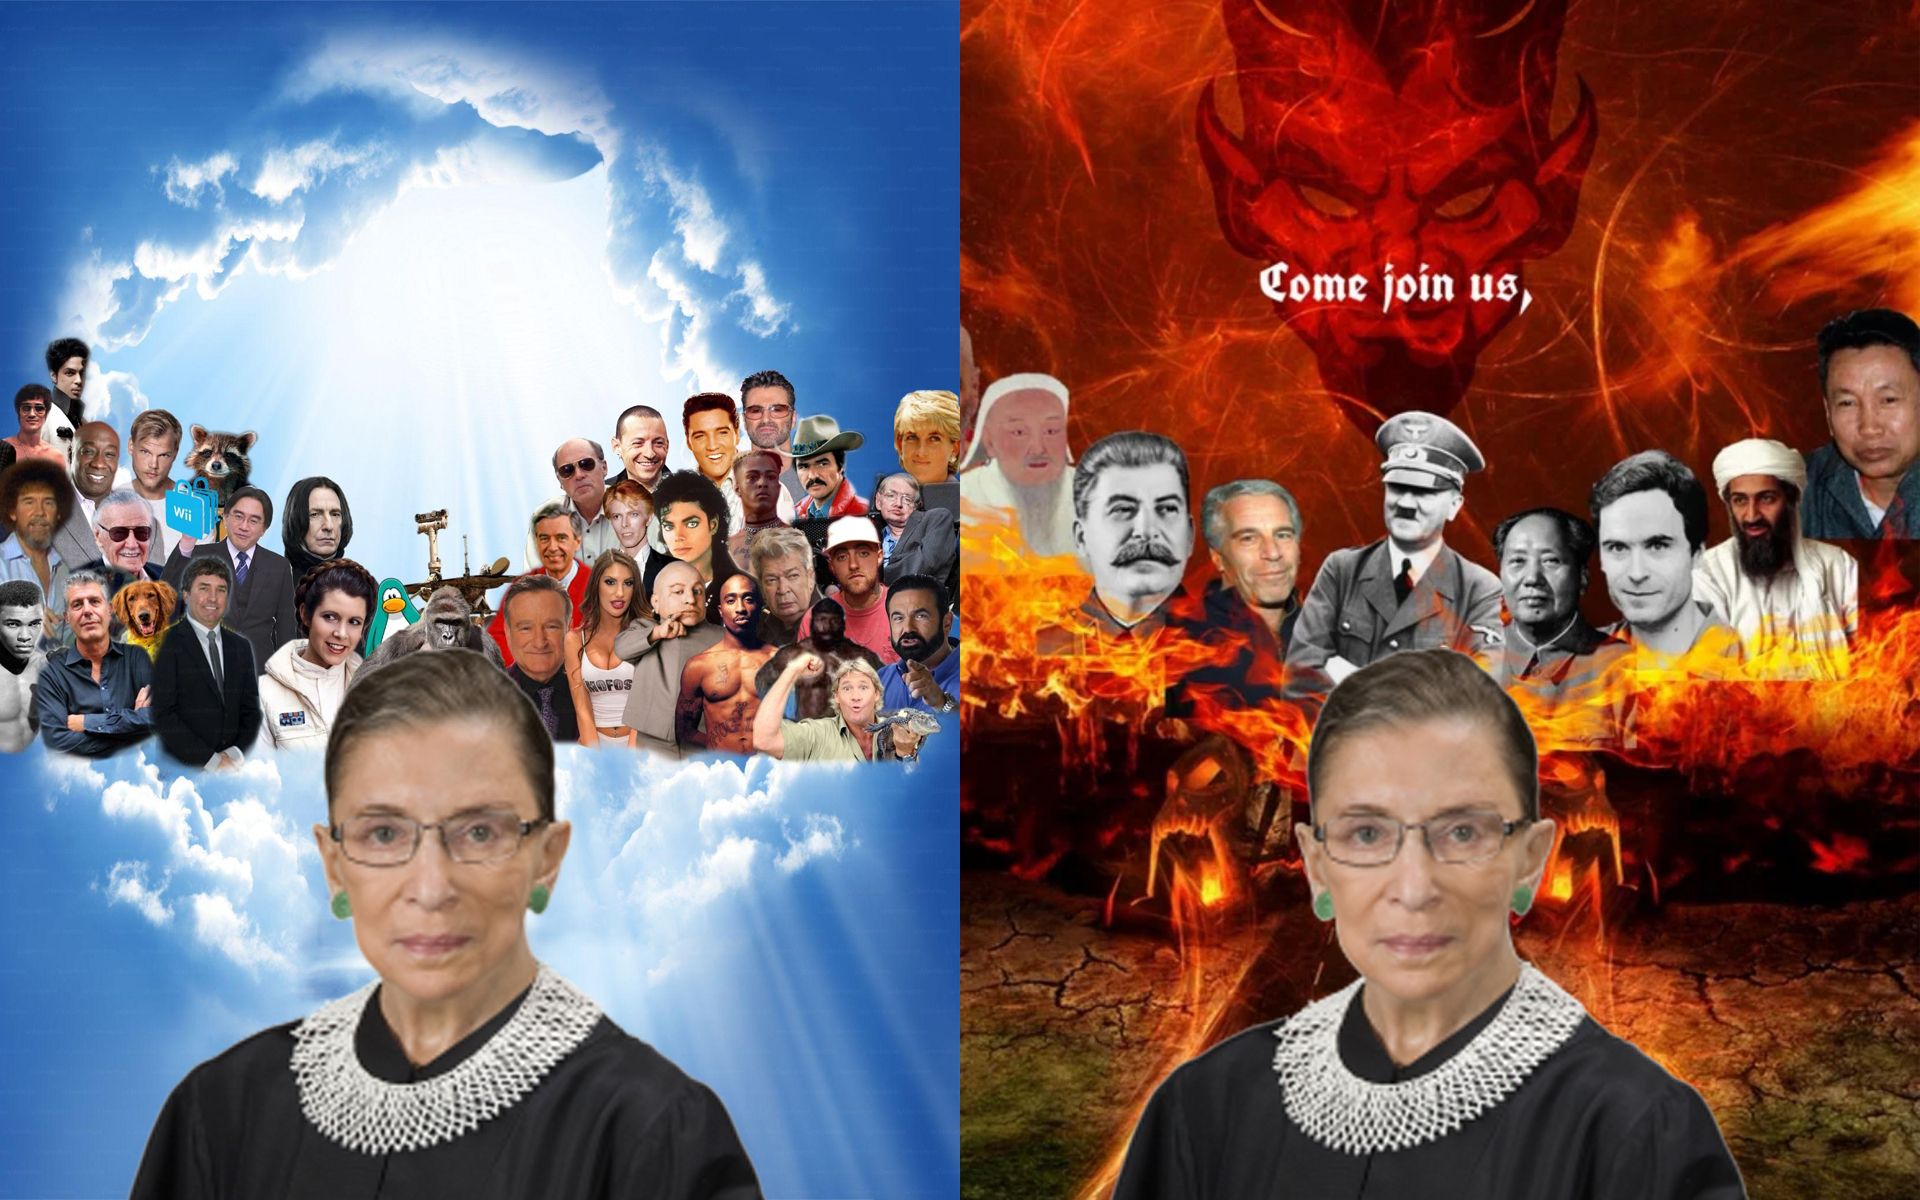 Senate Can't Agree On Whether To Photoshop RBG Into Heaven Or Hell Meme